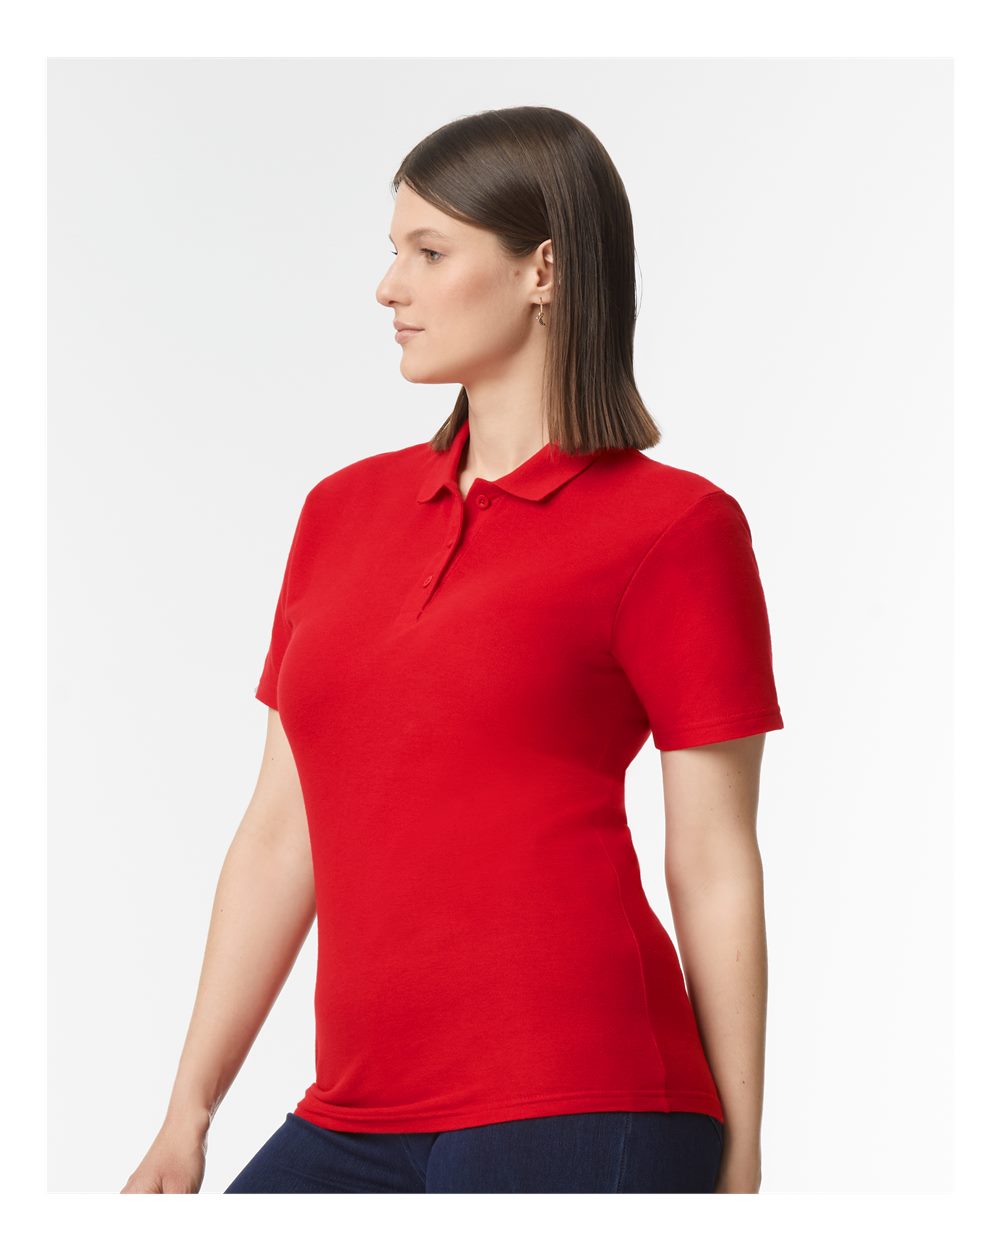 Gildan Softstyle® Women's Pique Polo 64800L #colormdl_Red